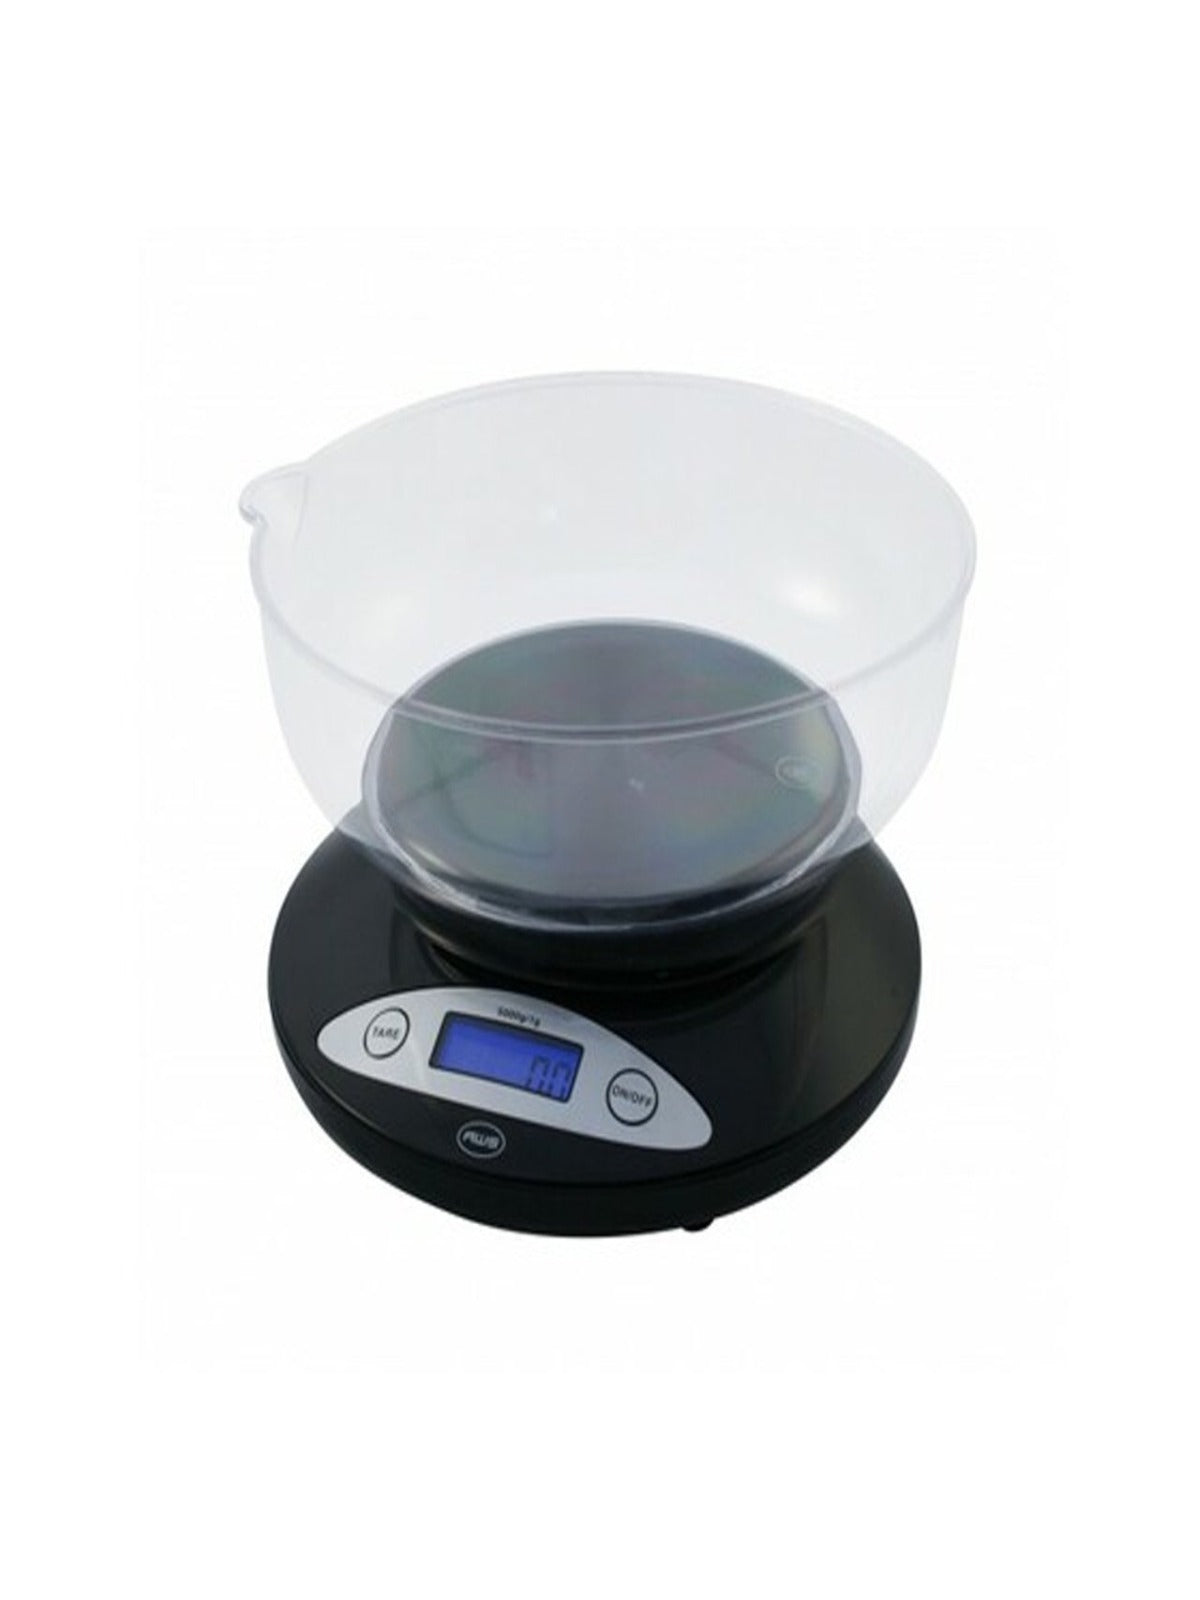 DIGITAL PRECISION KITCHEN SCALE WITH REMOVABLE BOWL, 2000G X 0.1G (2K-BOWL)